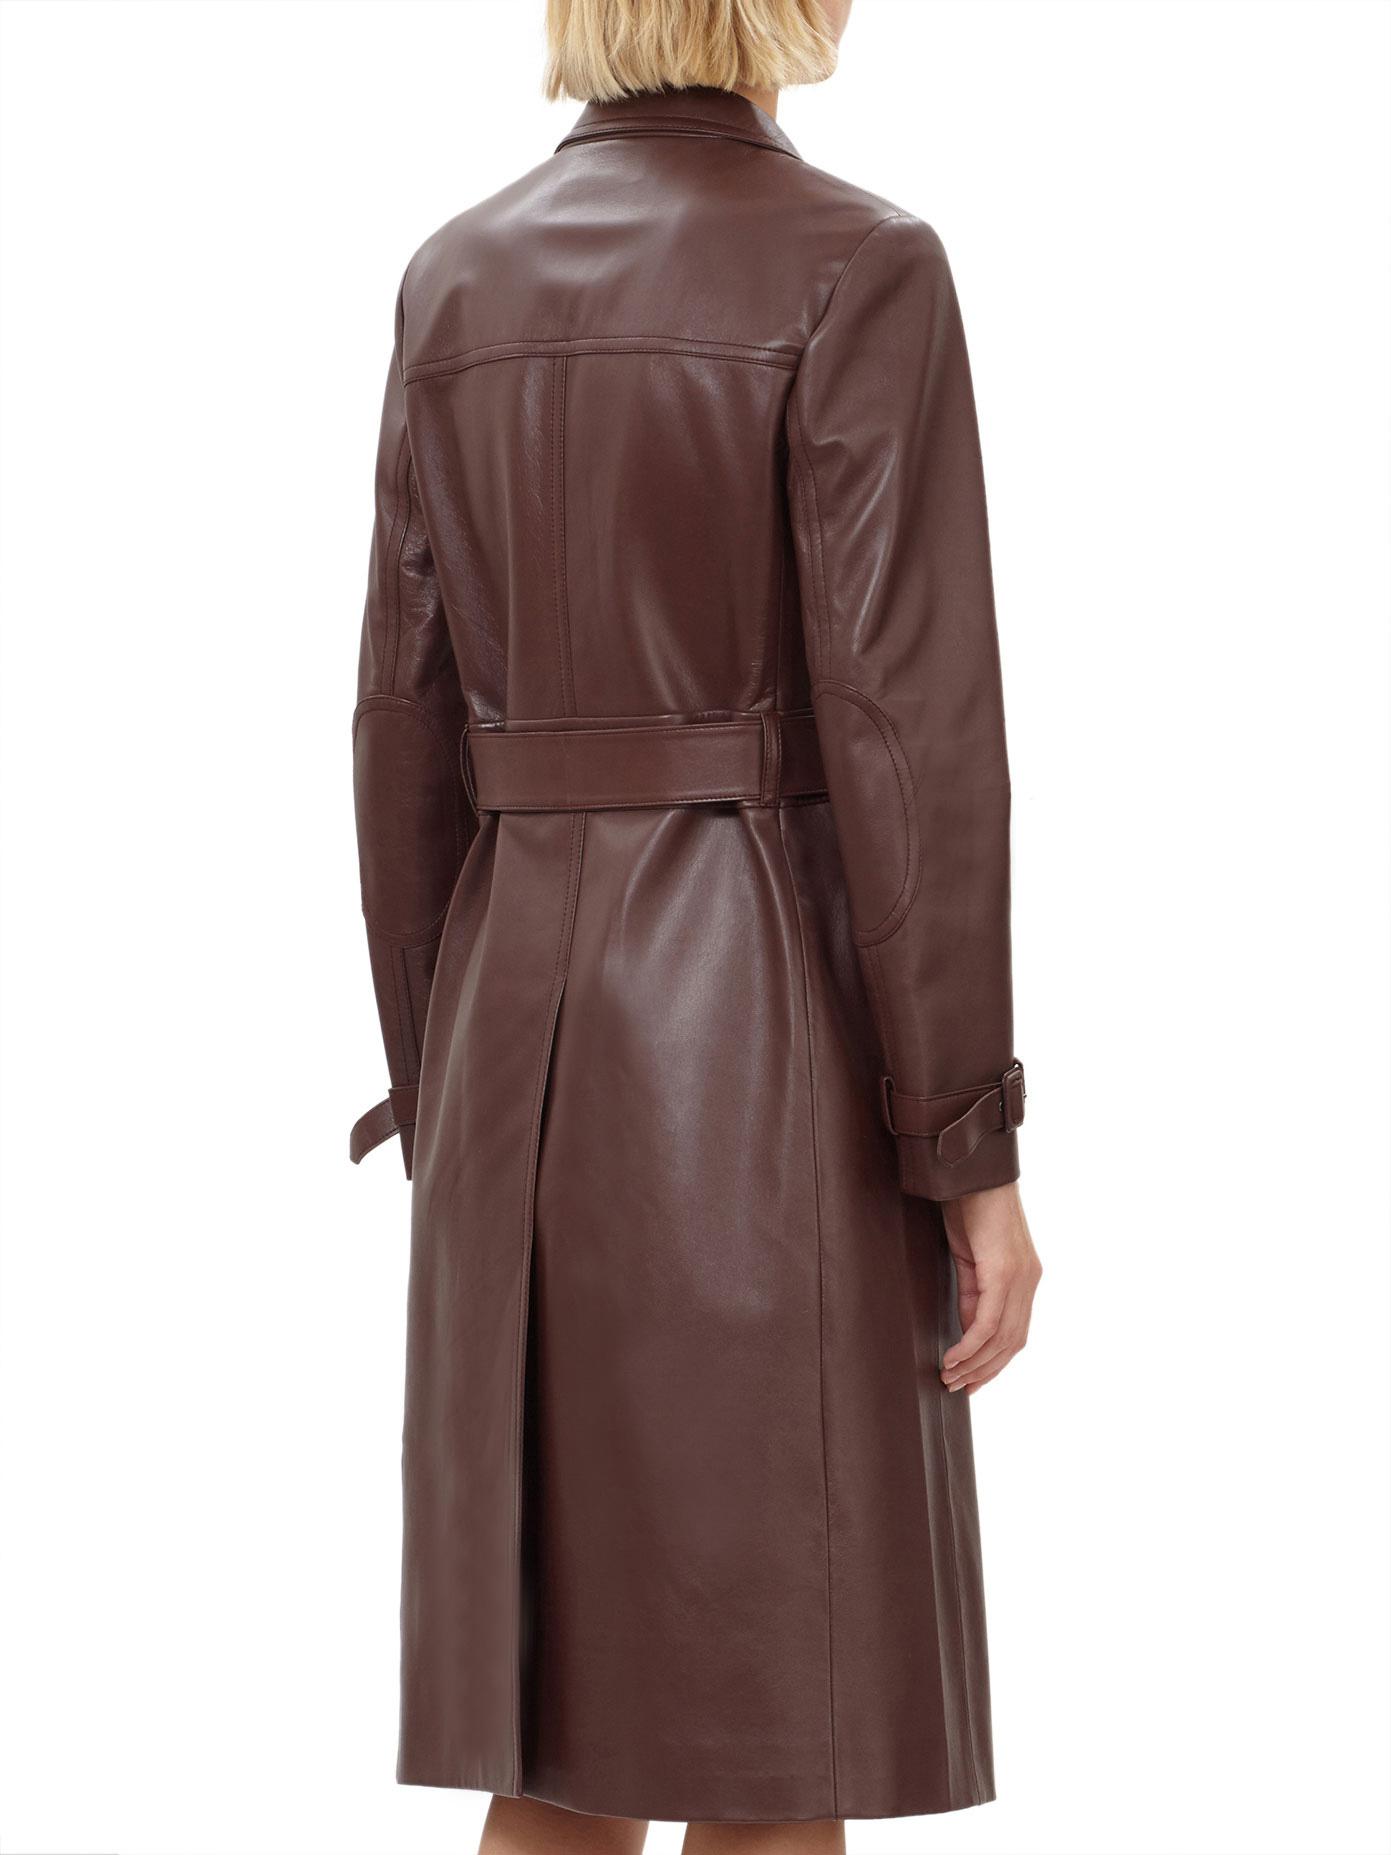 Prada Leather Trench Coat in Bordeaux (Brown) - Lyst